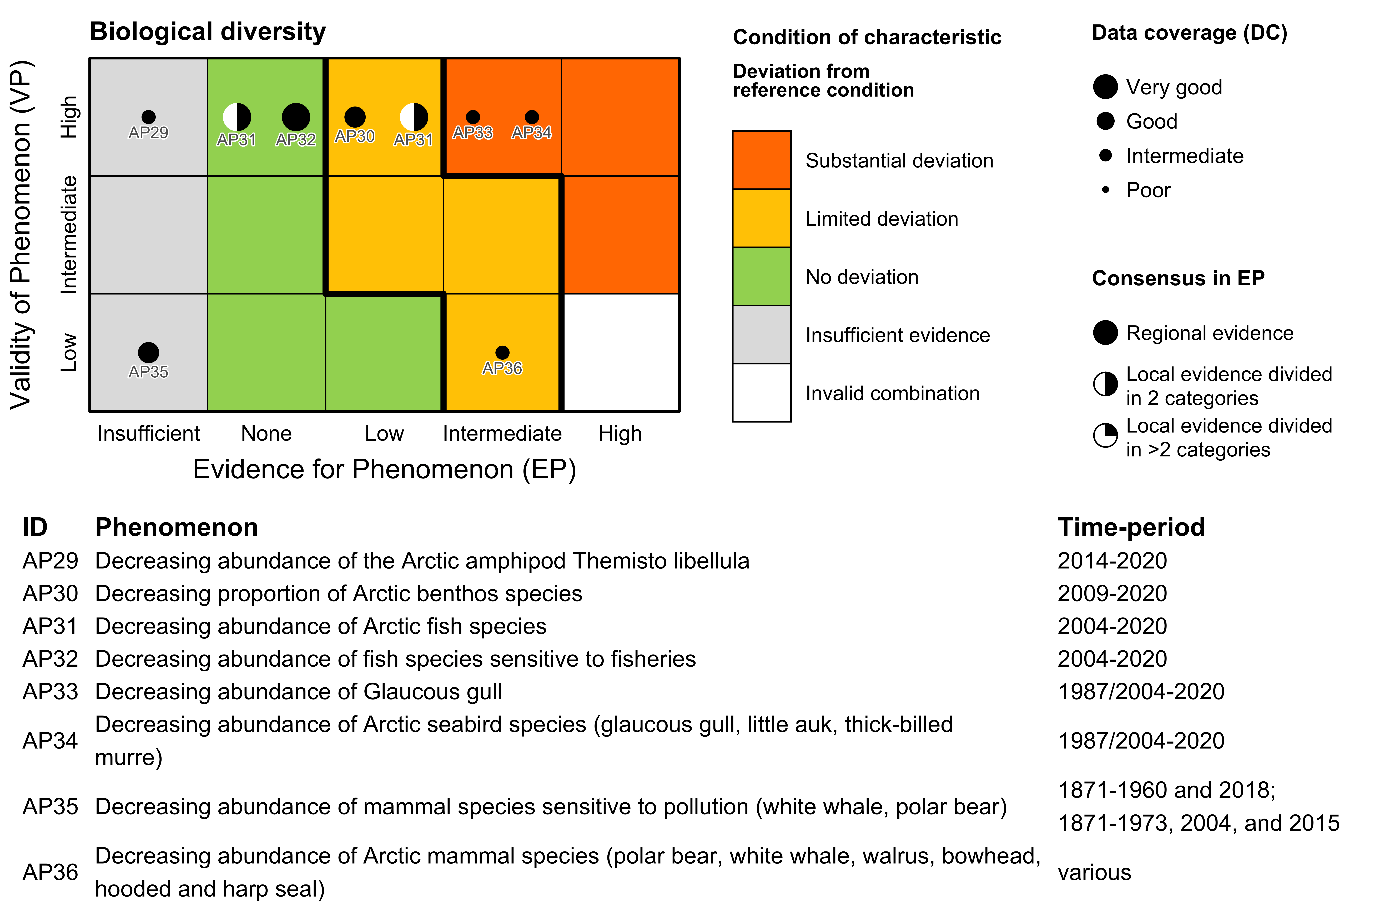 Figure 7.3.1a(vi): The PAEC assessment diagram for the Biological diversity ecosystem characteristic of the Arctic part of the Barents Sea.